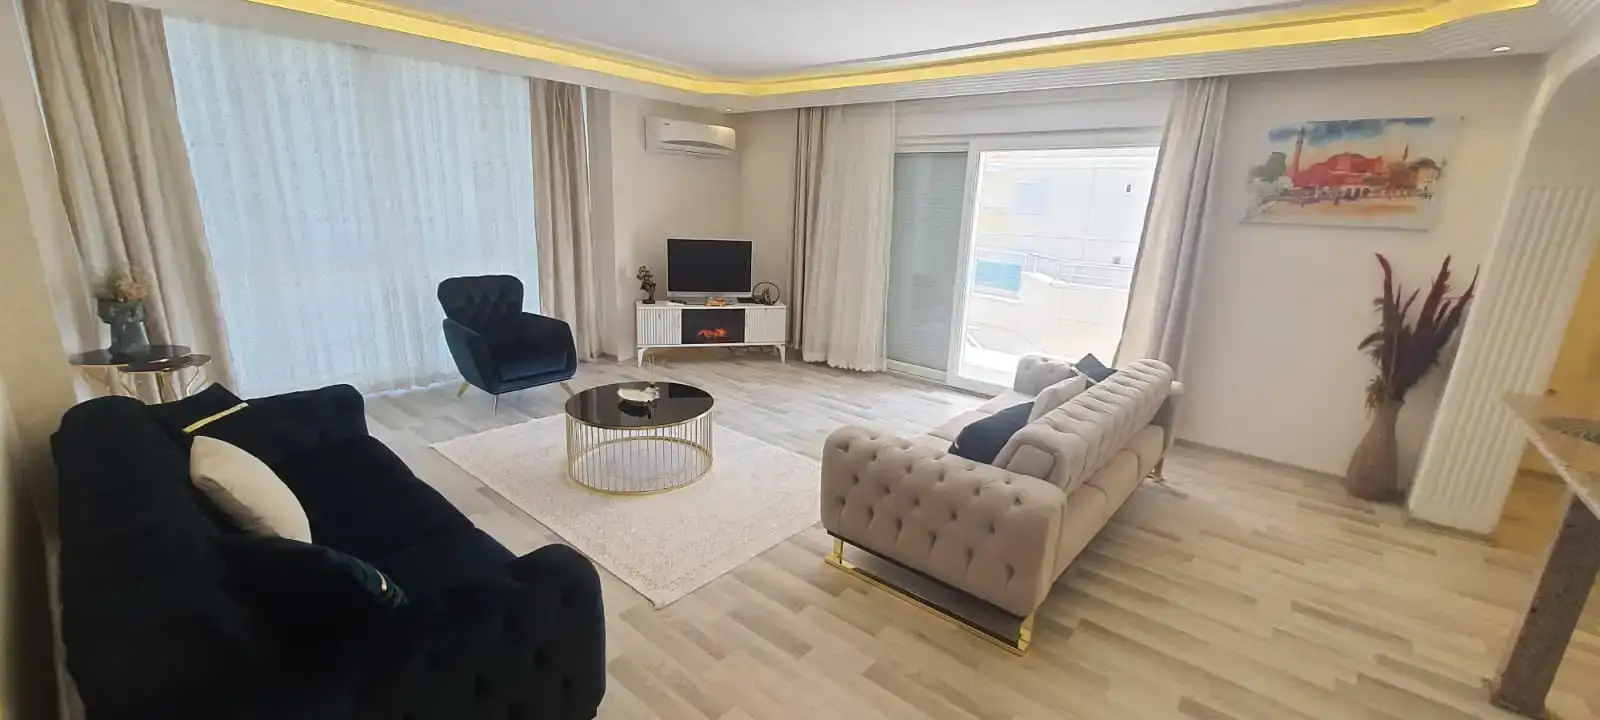 FULLY FURNISHED 3 BEDROOM APARTMENT FOR SALE - FULL FACILITY COMPLEX